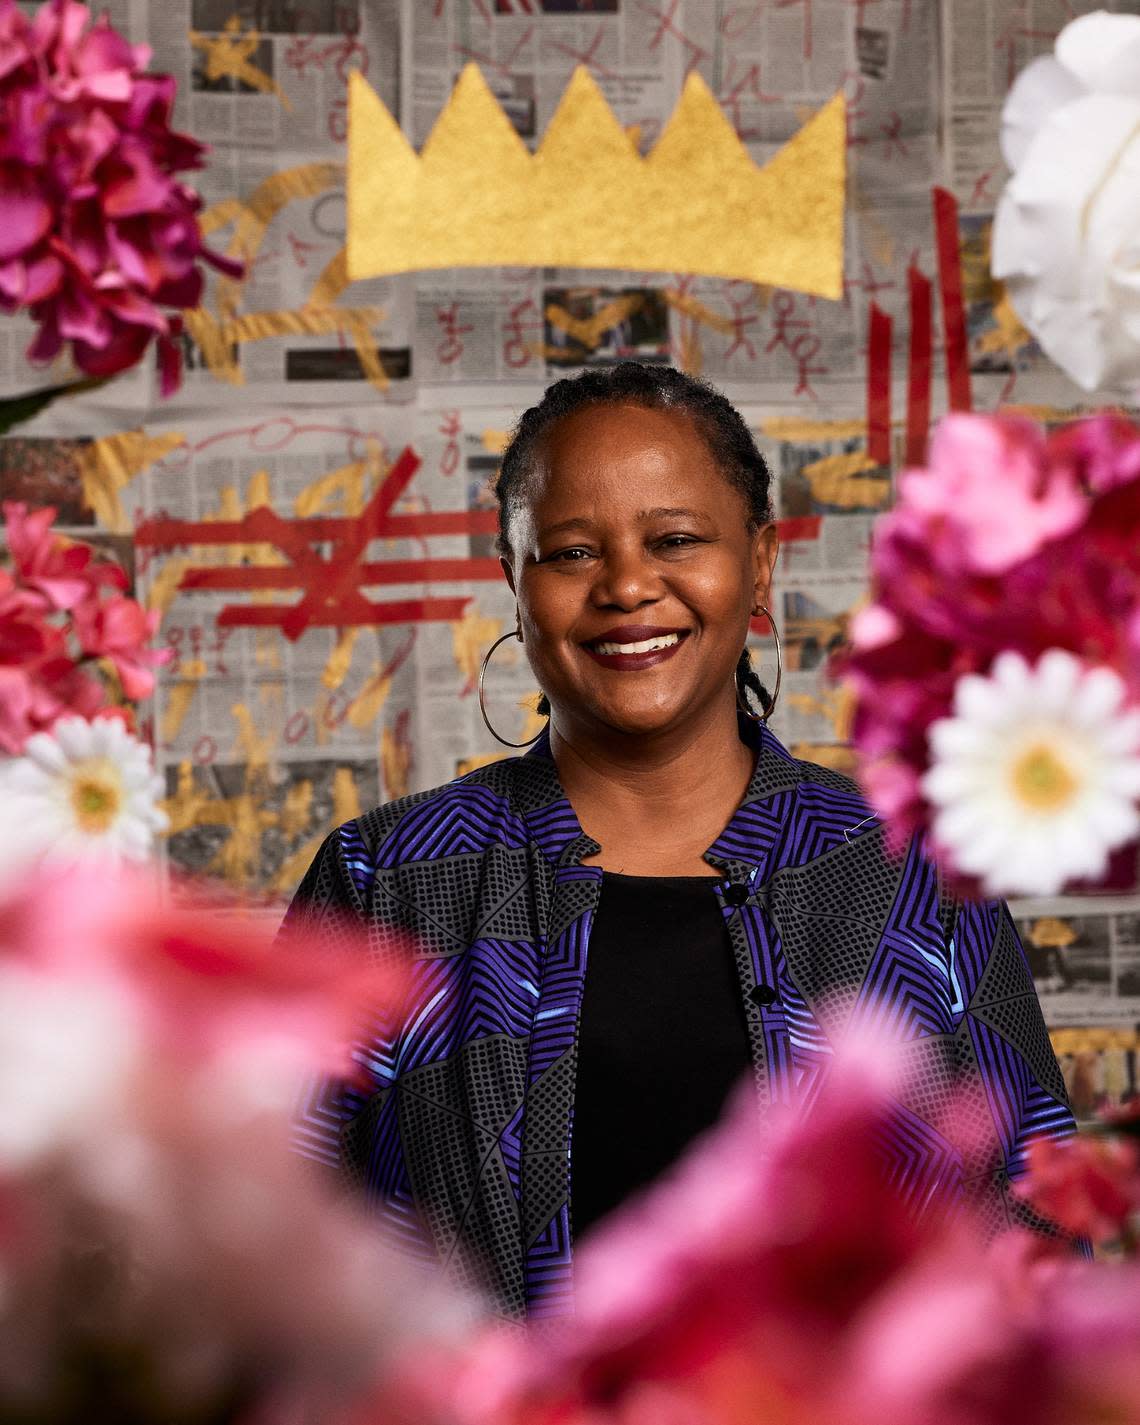 Celebrated Haitian-American writer Edwidge Danticat will see her book “Create Dangerously” become a work of theater at Miami New Drama. (Photo courtesy of FURIOSA Productions)